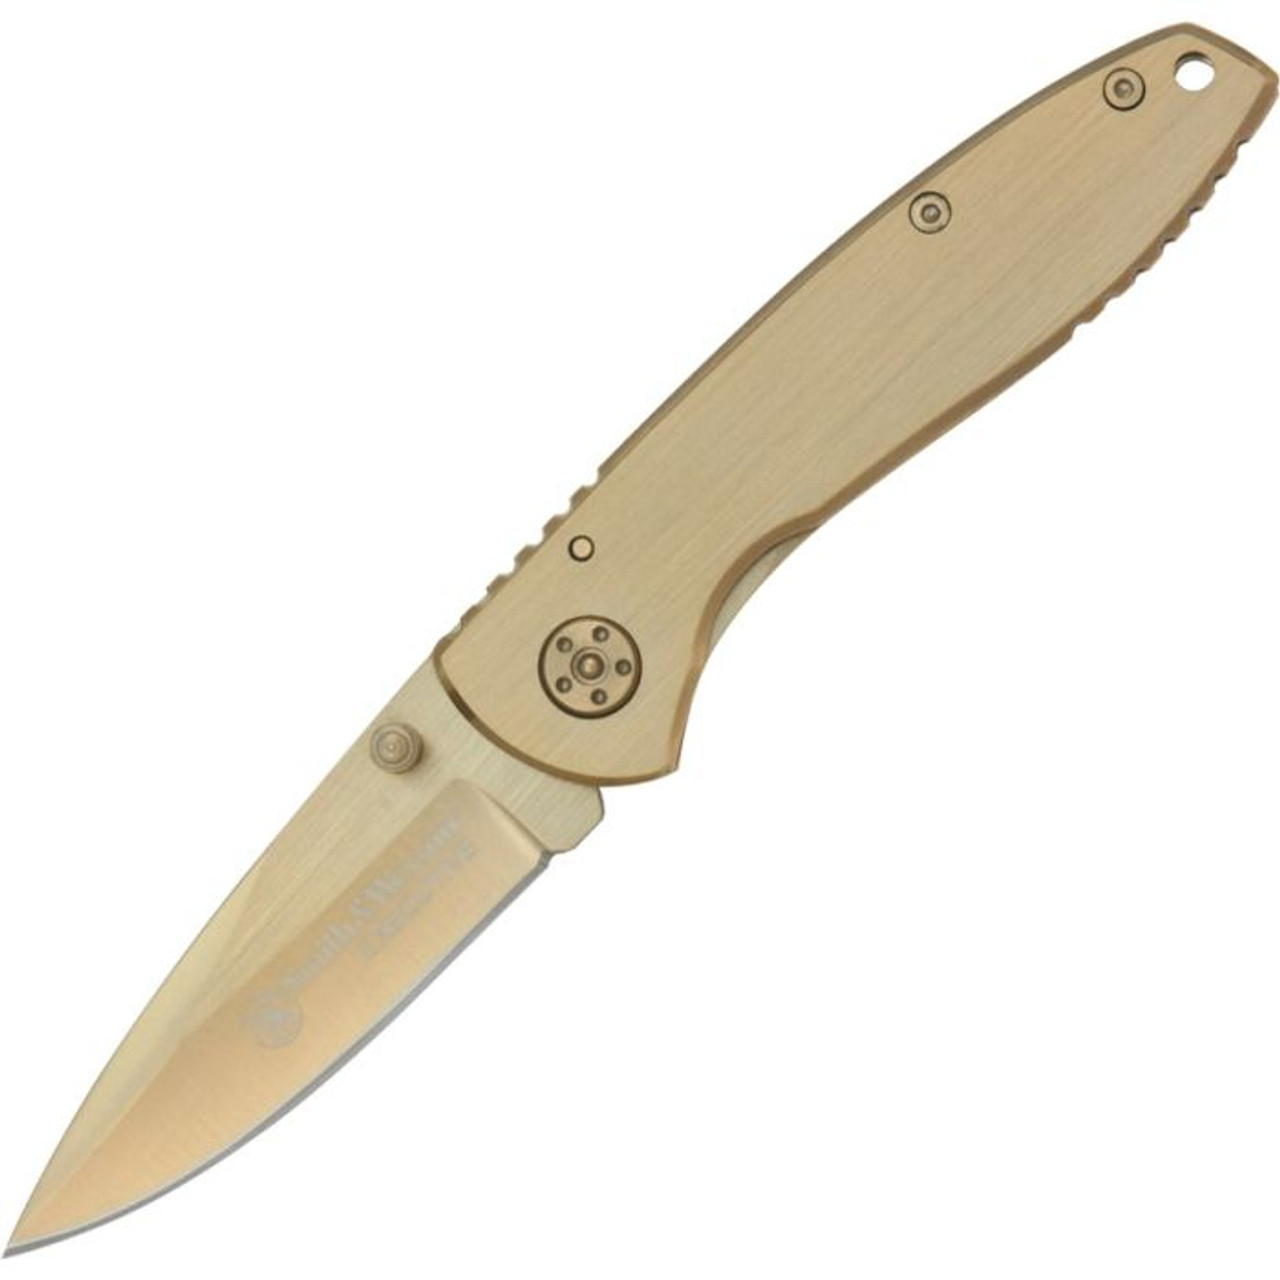 Smith & Wesson Executive (SW110GL) 2.8" Stainless Steel Gold Drop Point Plain Blade, Gold Stainless Steel Handle